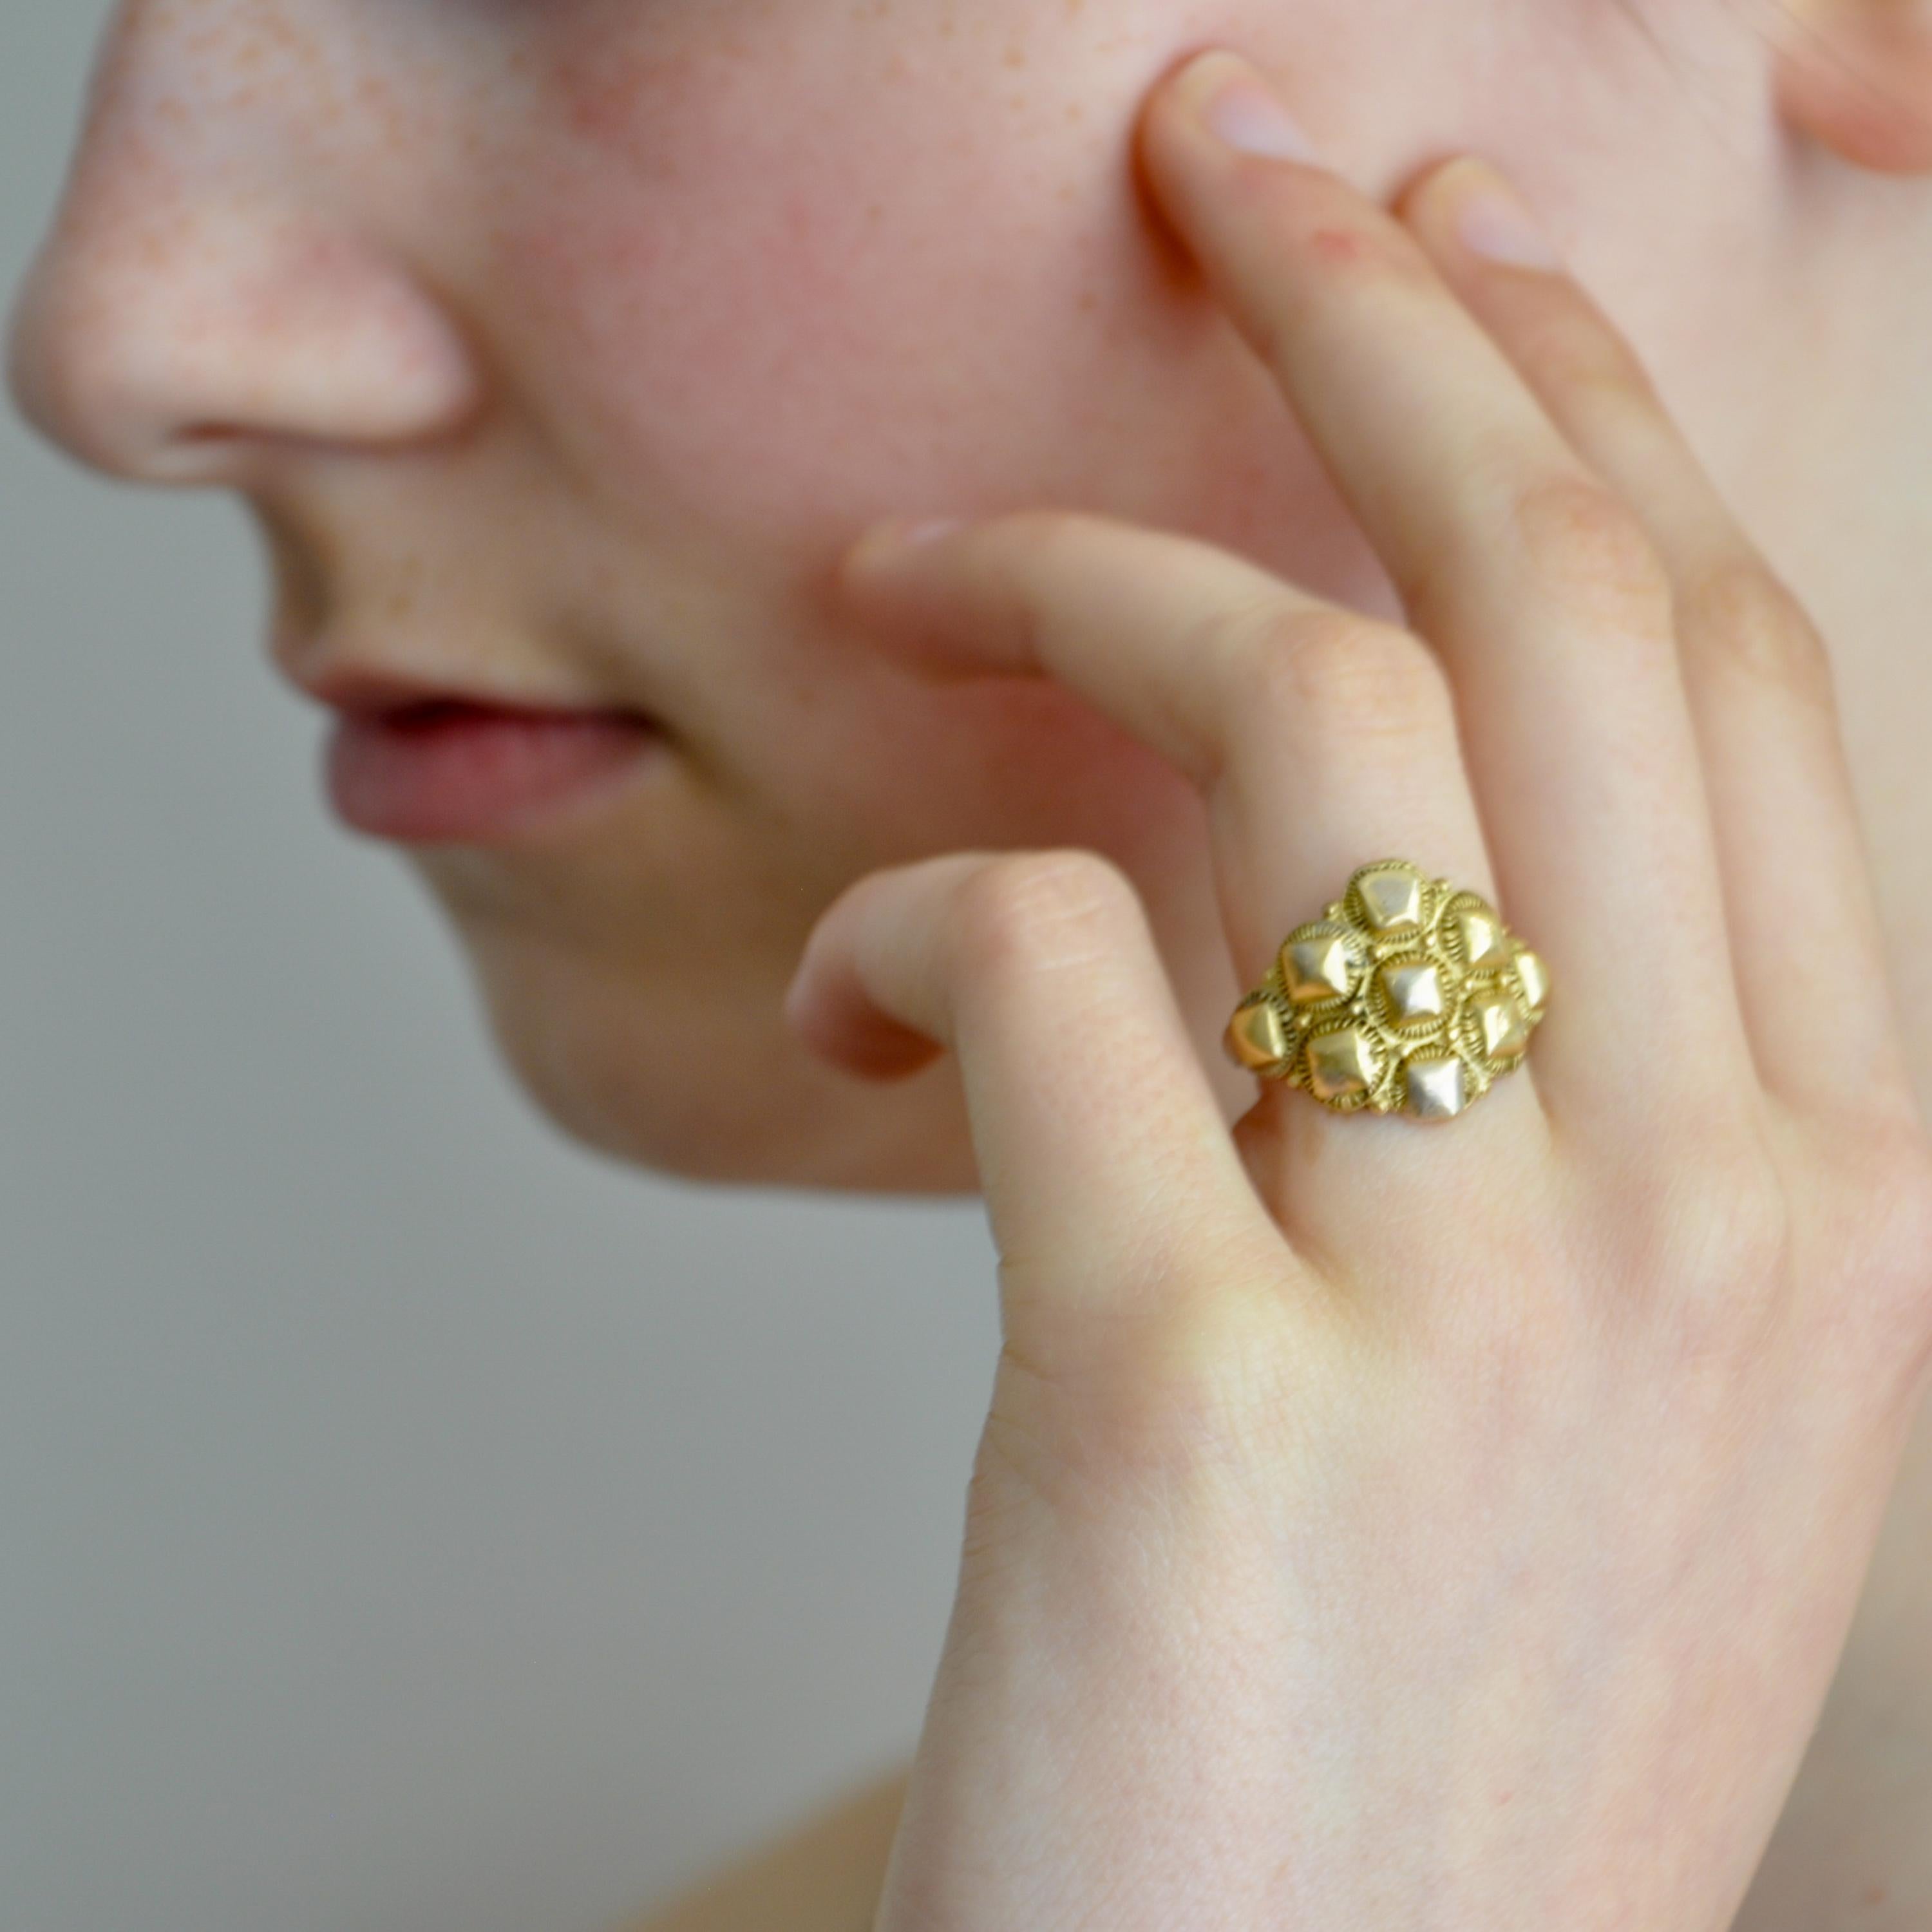 An antique baroque-style 14 karat yellow gold fantasy ring. The ring features an embossed design with small blocks. The rosette-shaped ring has nine gold faceted caps set within a spiral wire. These type of rings are in Dutch called 'prikkelring'.